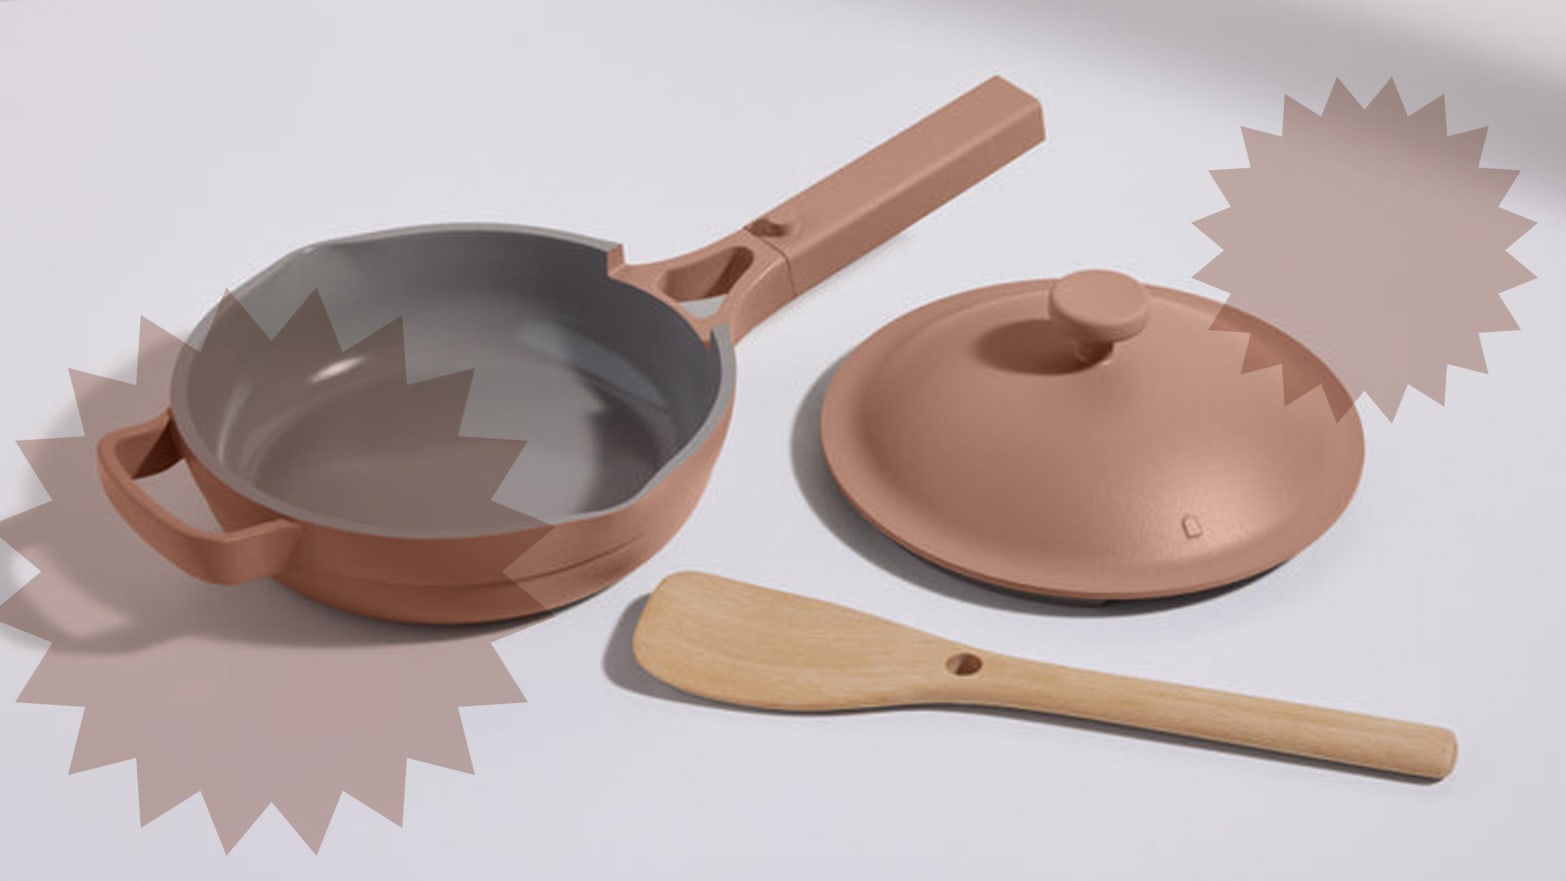 Our Place Launches New Mini Always Pan and Perfect Pot in 2022